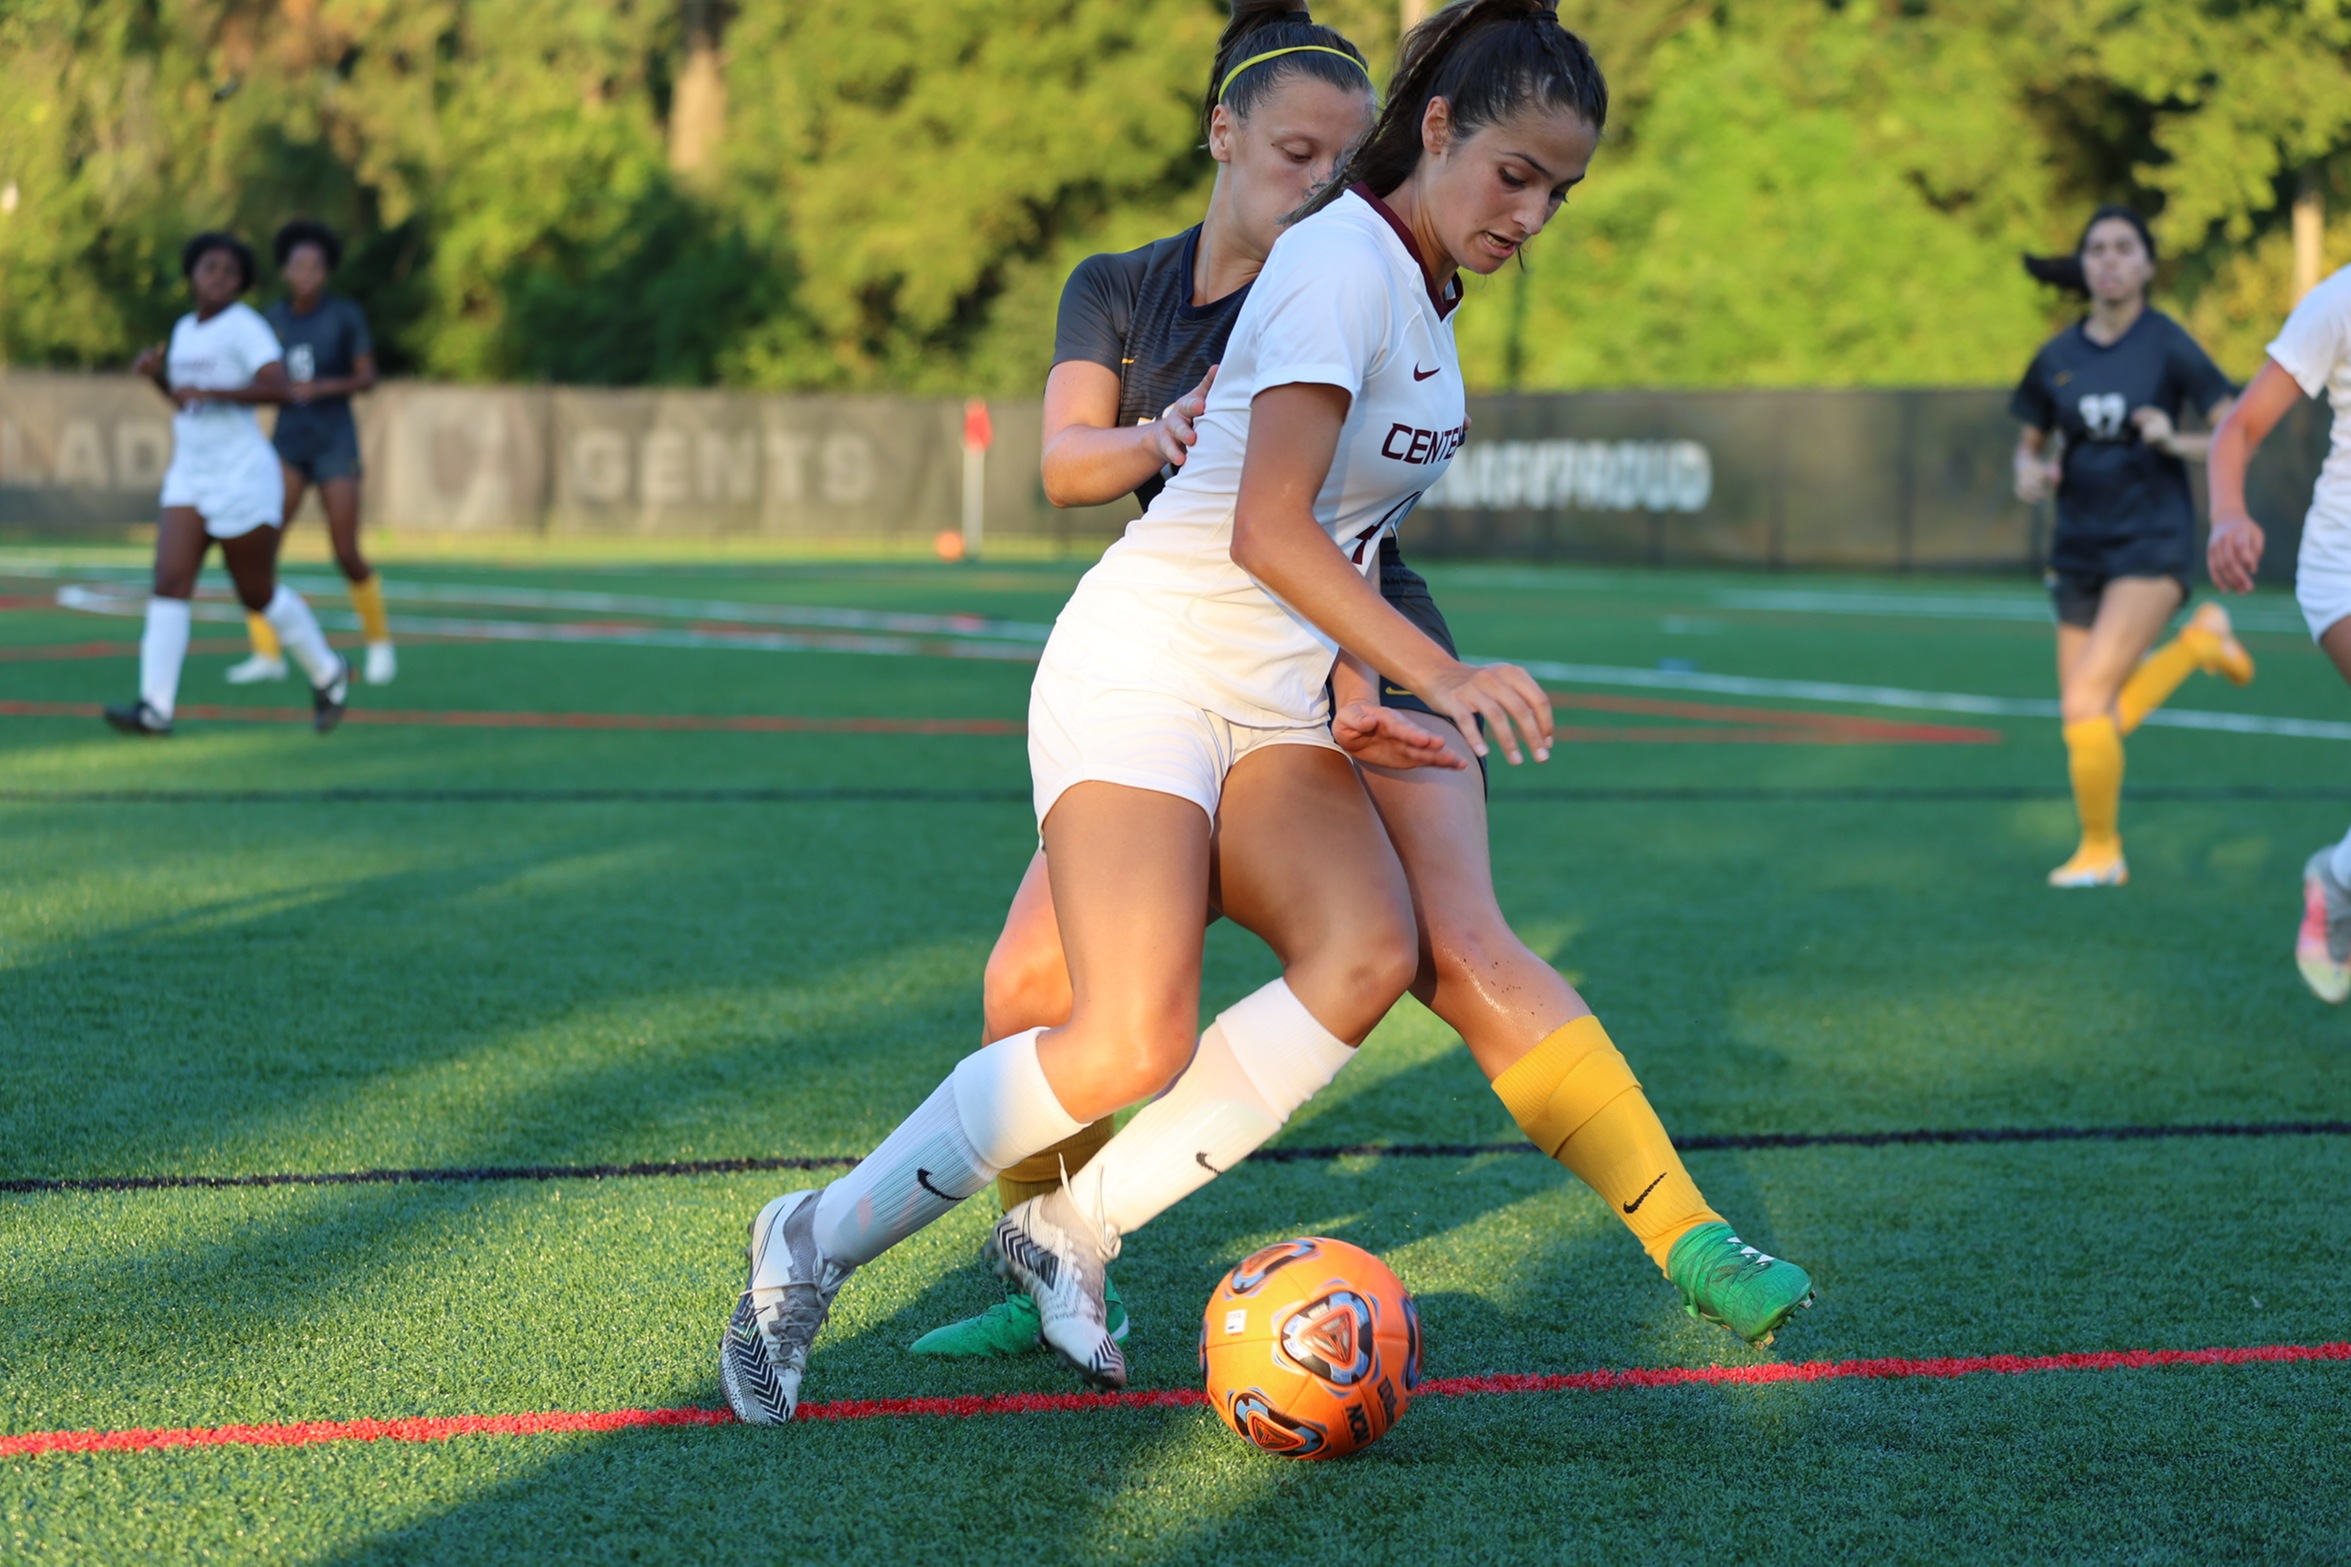 The Ladies came up short against Southwestern on Sunday, falling 2-0 to the Pirates at Mayo Field.